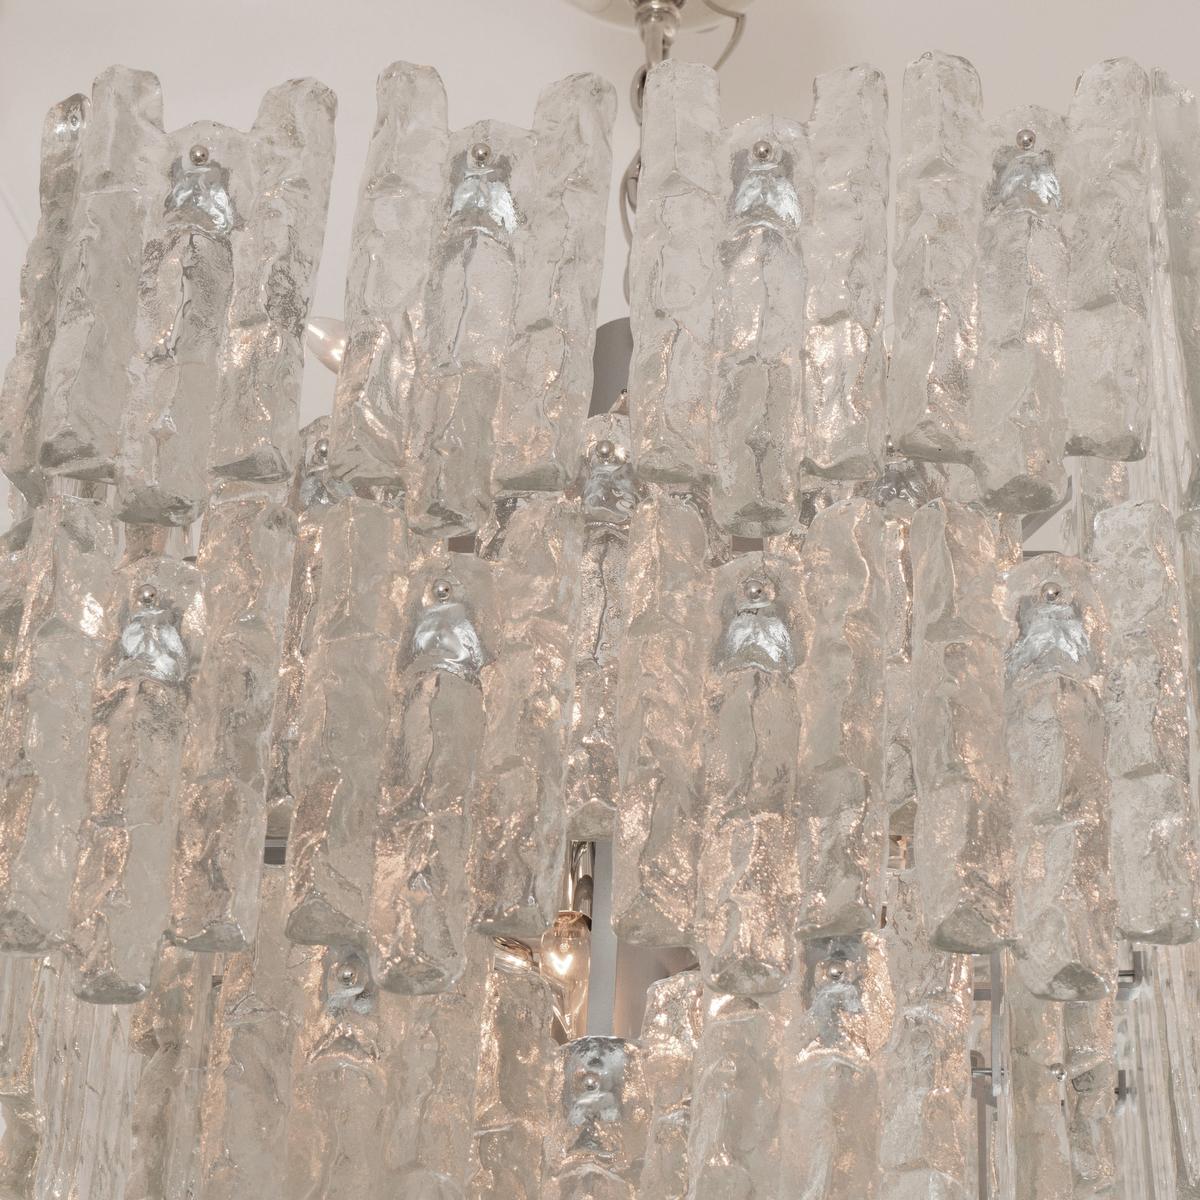 Austrian Square Two-Tier Chandelier Composed of Ice Inspired Glass Elements